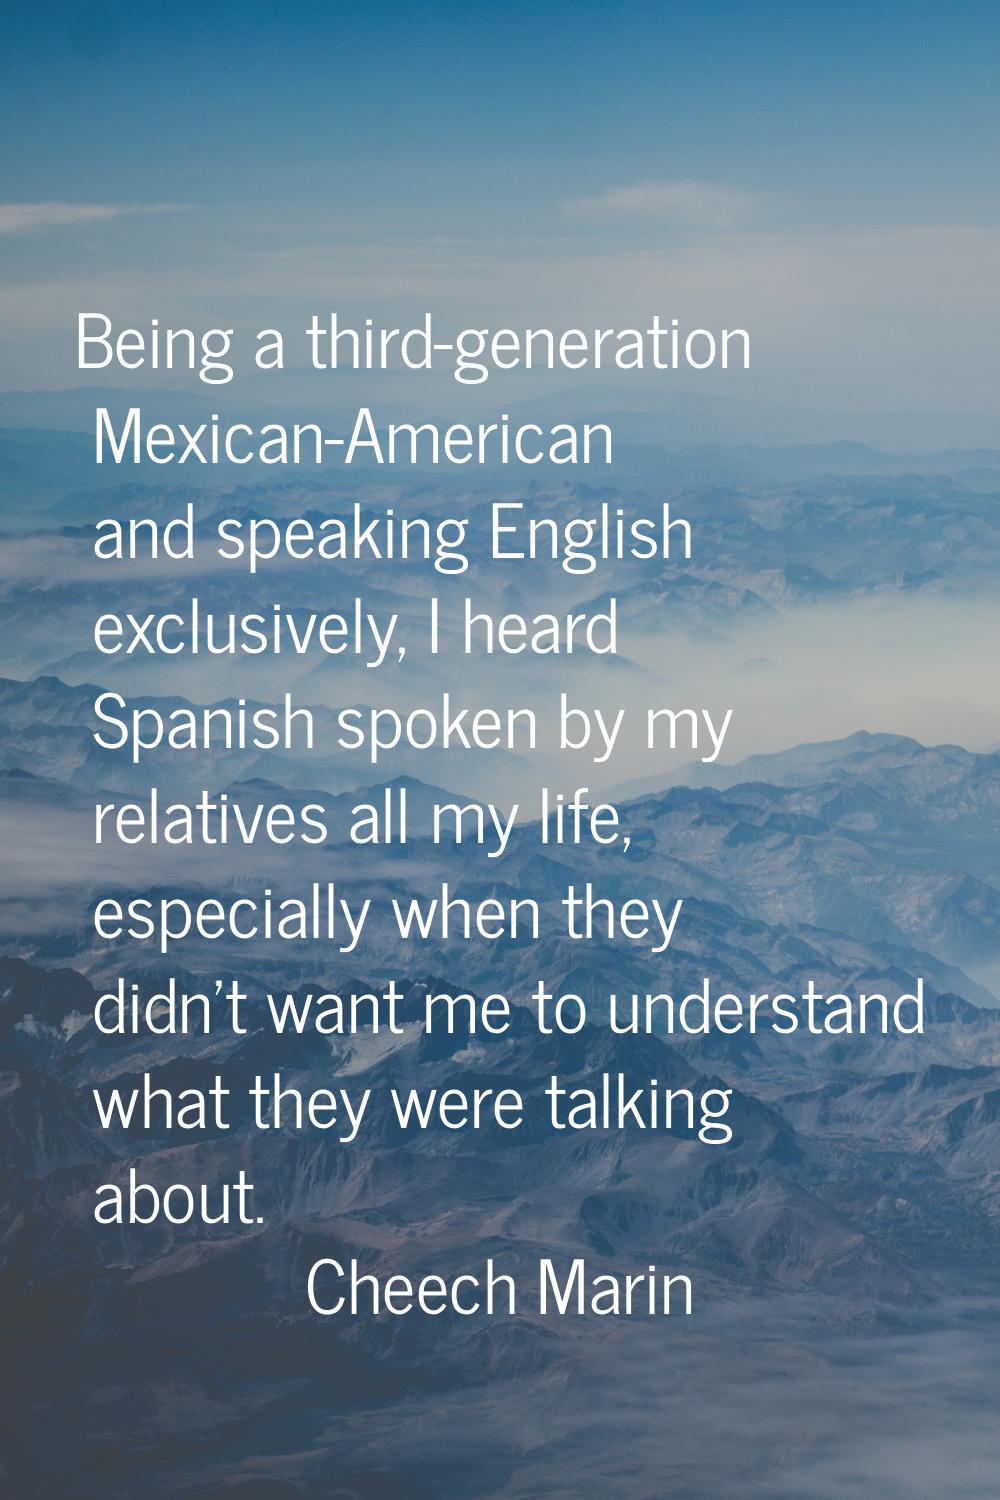 Being a third-generation Mexican-American and speaking English exclusively, I heard Spanish spoken 